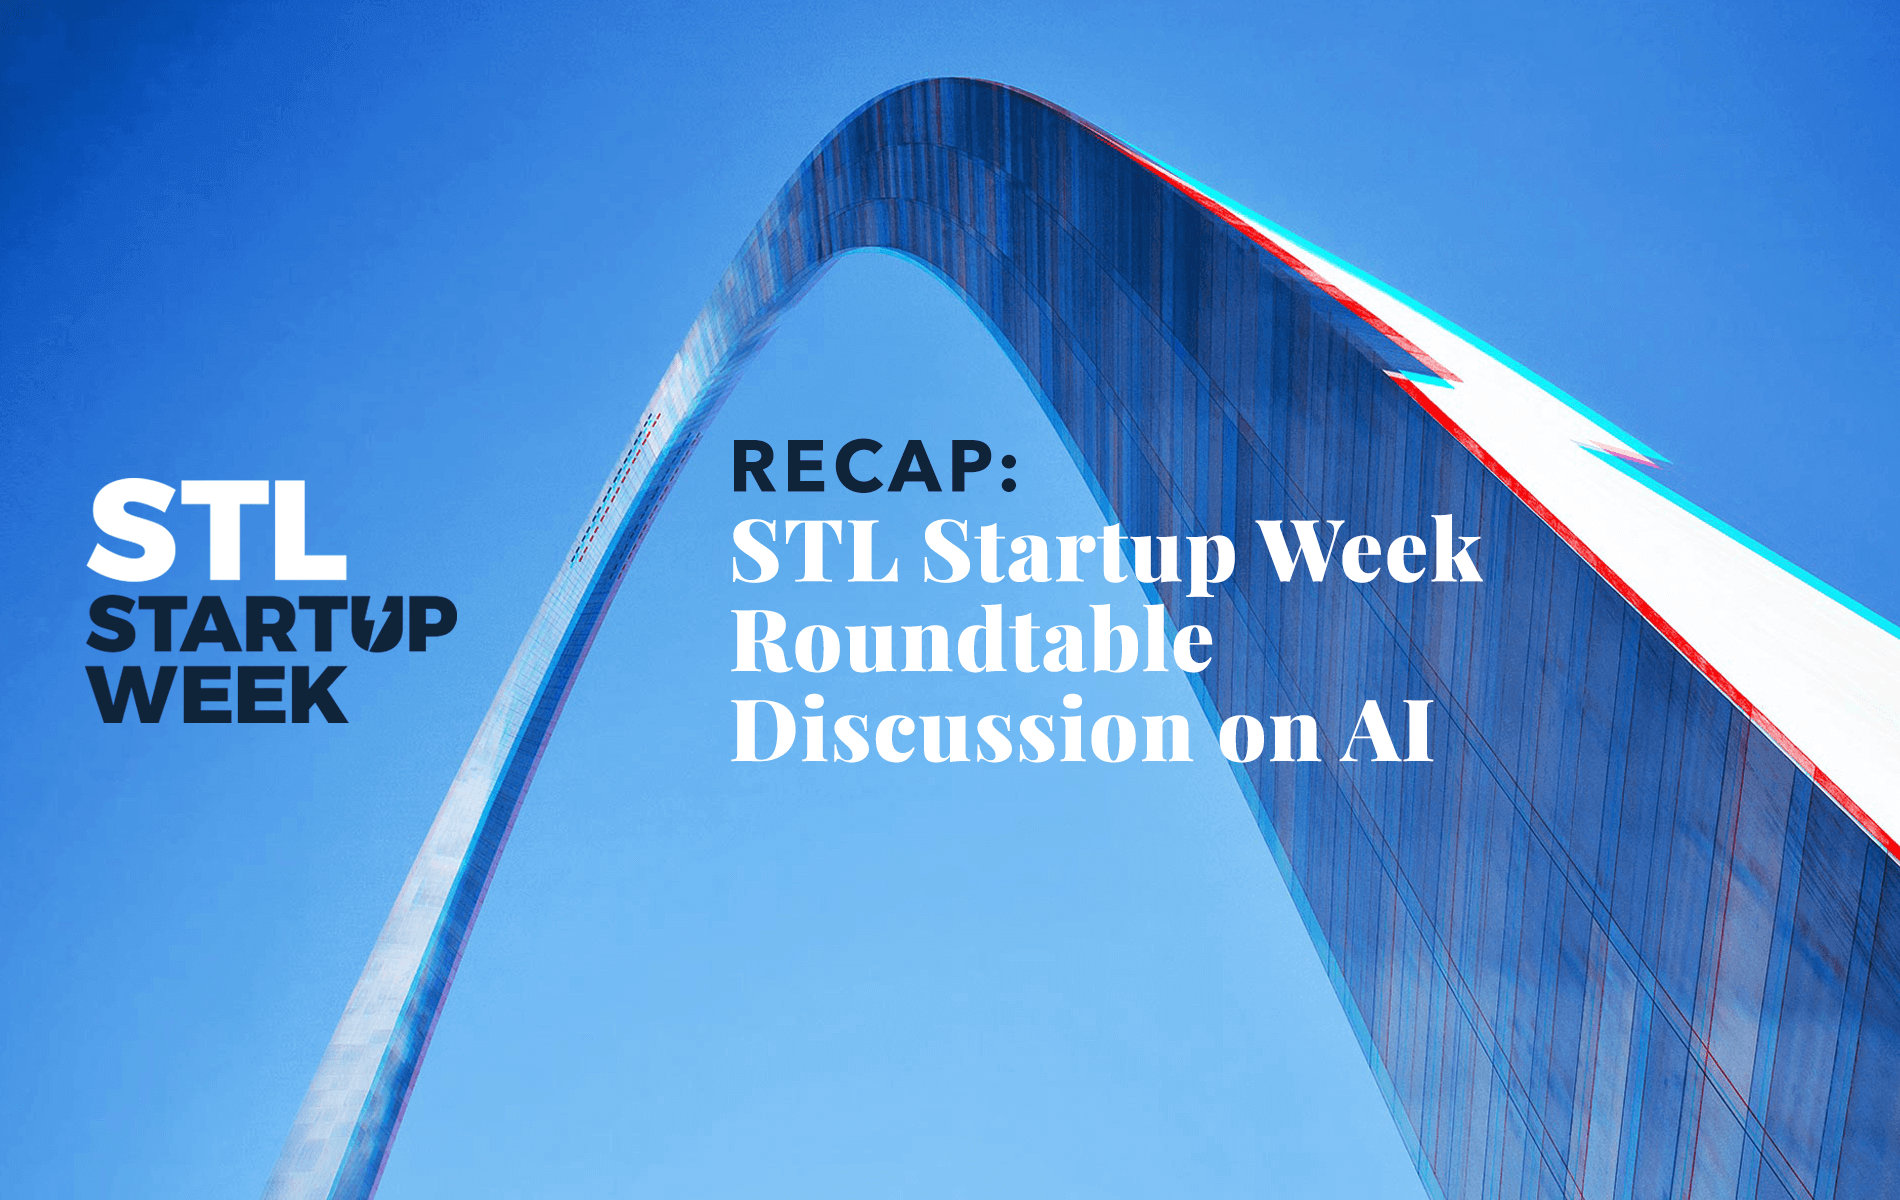 Recap: STL Startup Week Roundtable Discussion on AI